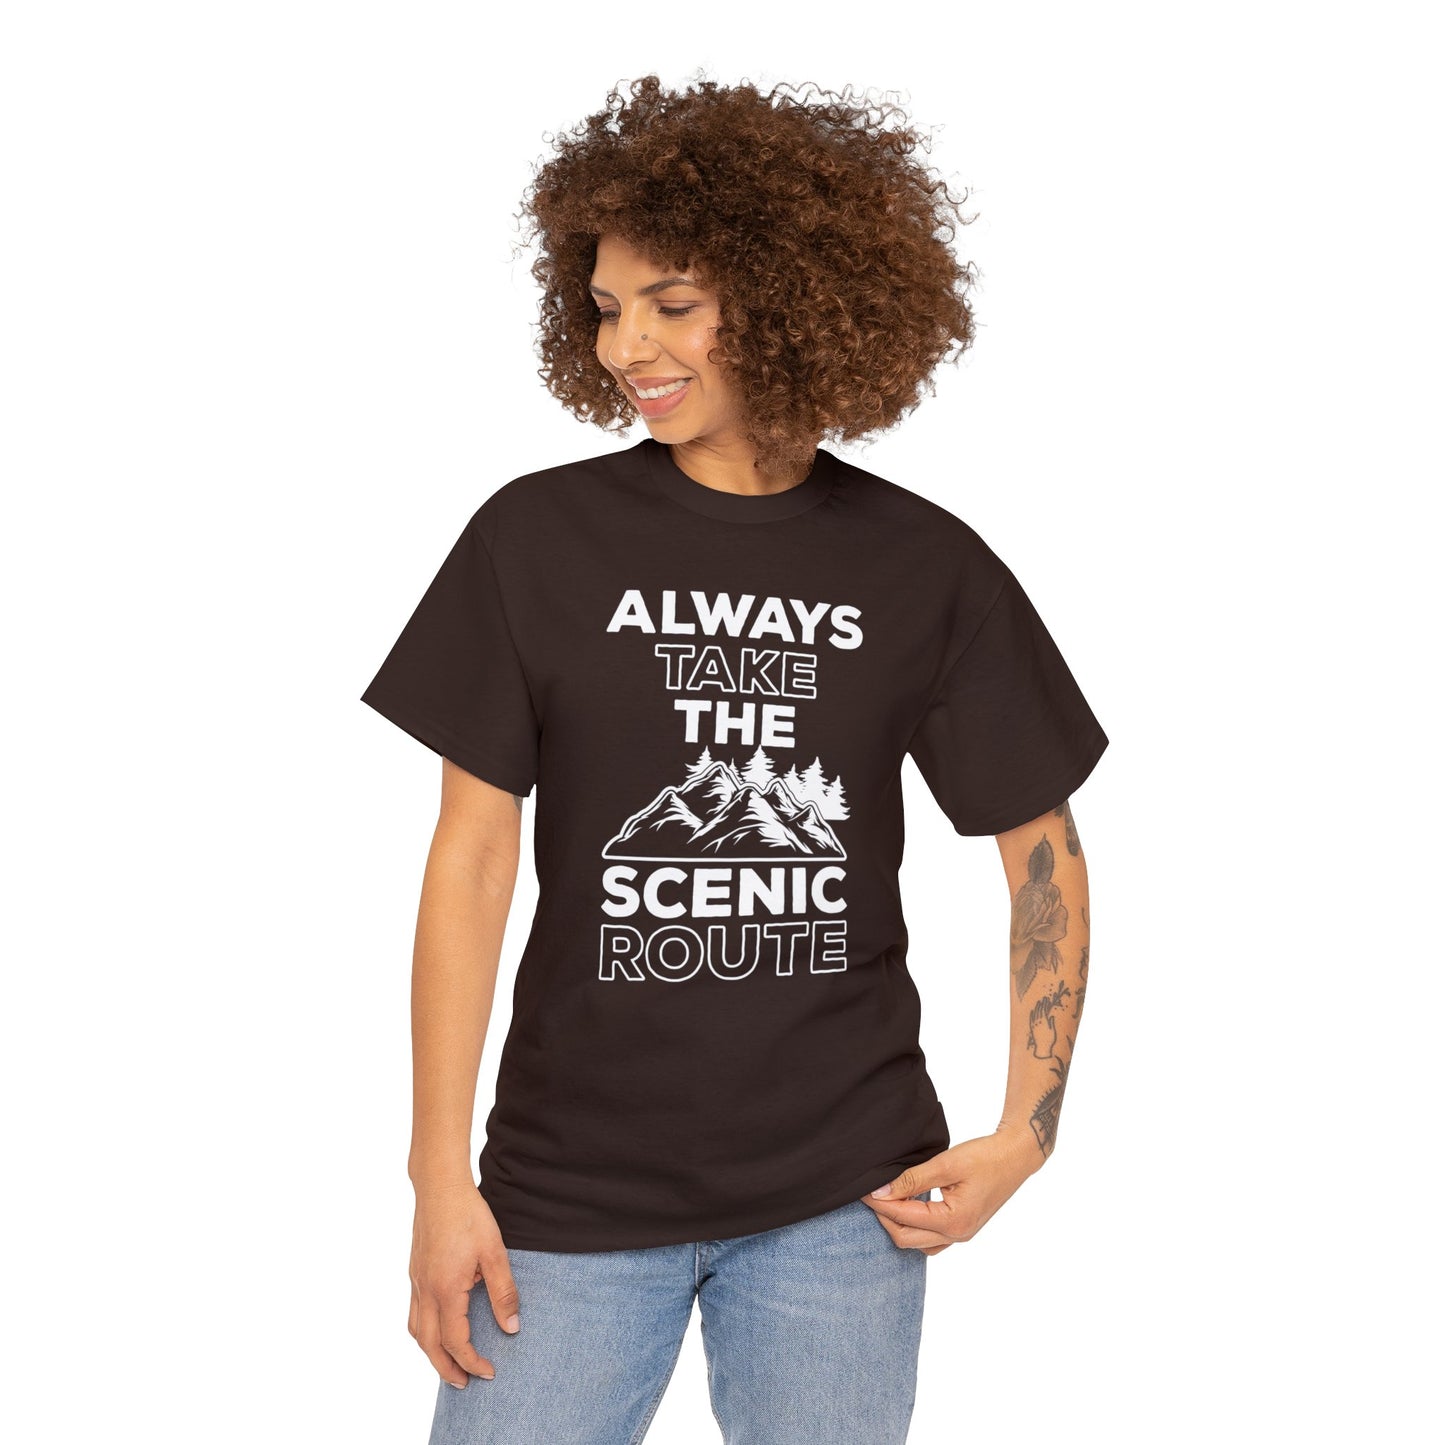 Always Take the Scenic Route T-Shirt – Perfect for Explorers and Nature Enthusiasts!